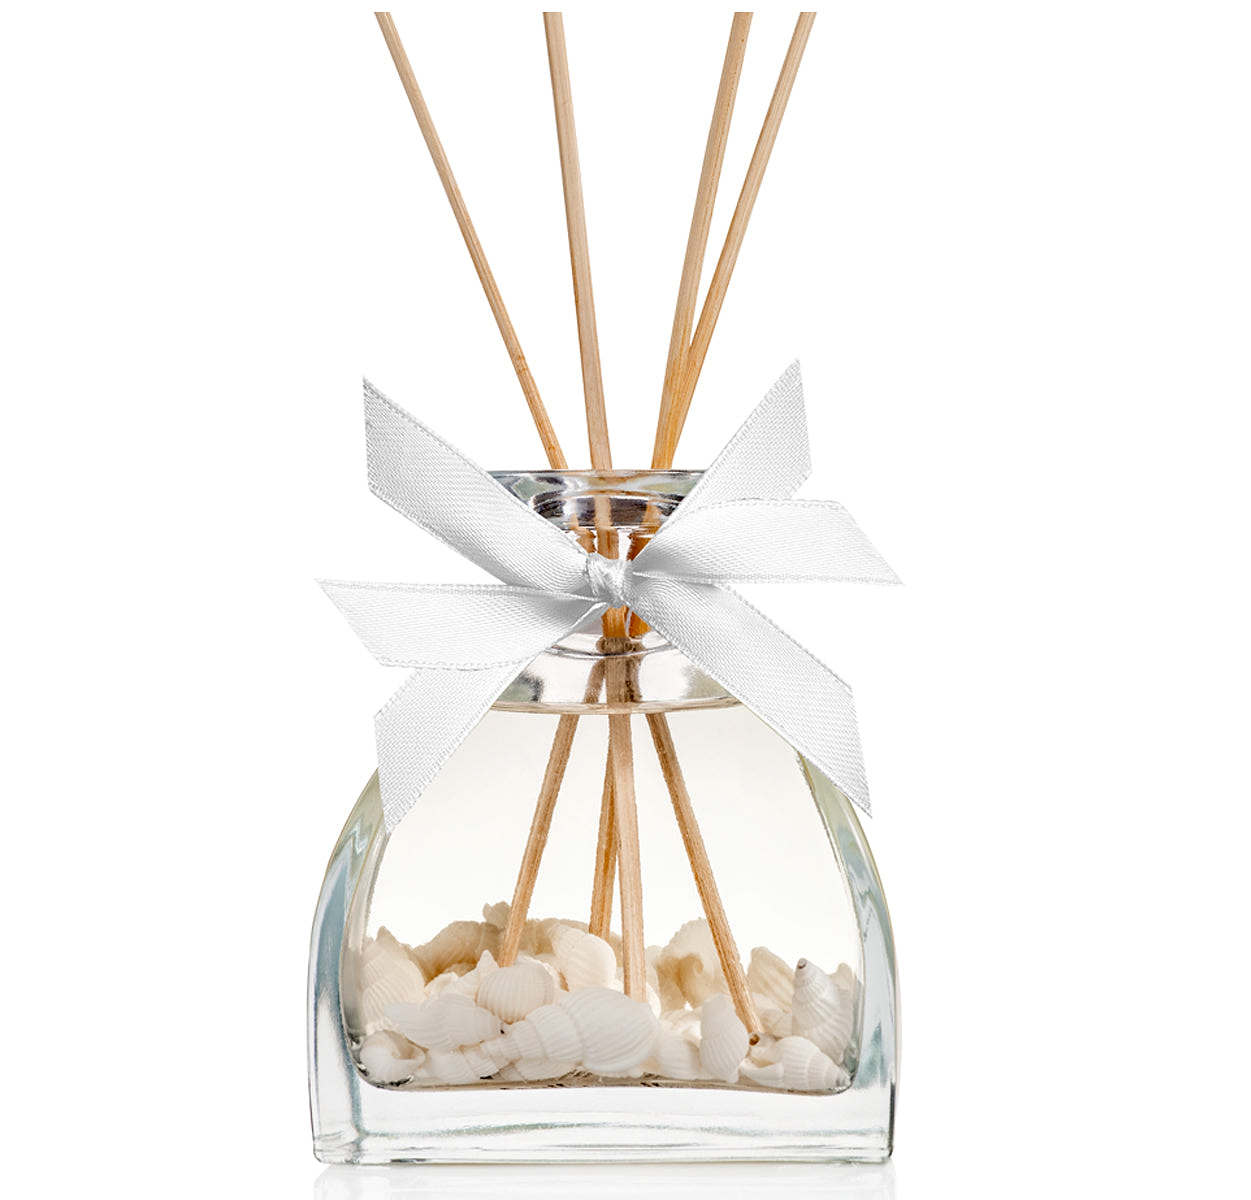 SPRING Fragrance Reed Diffuser Set | Large 9.47oz (280ml) | Fragrance Made in France | Home Décor | Scented Aromatic Oil with Best Ingredients | Room Air Freshener with Sea Shells & White Flower